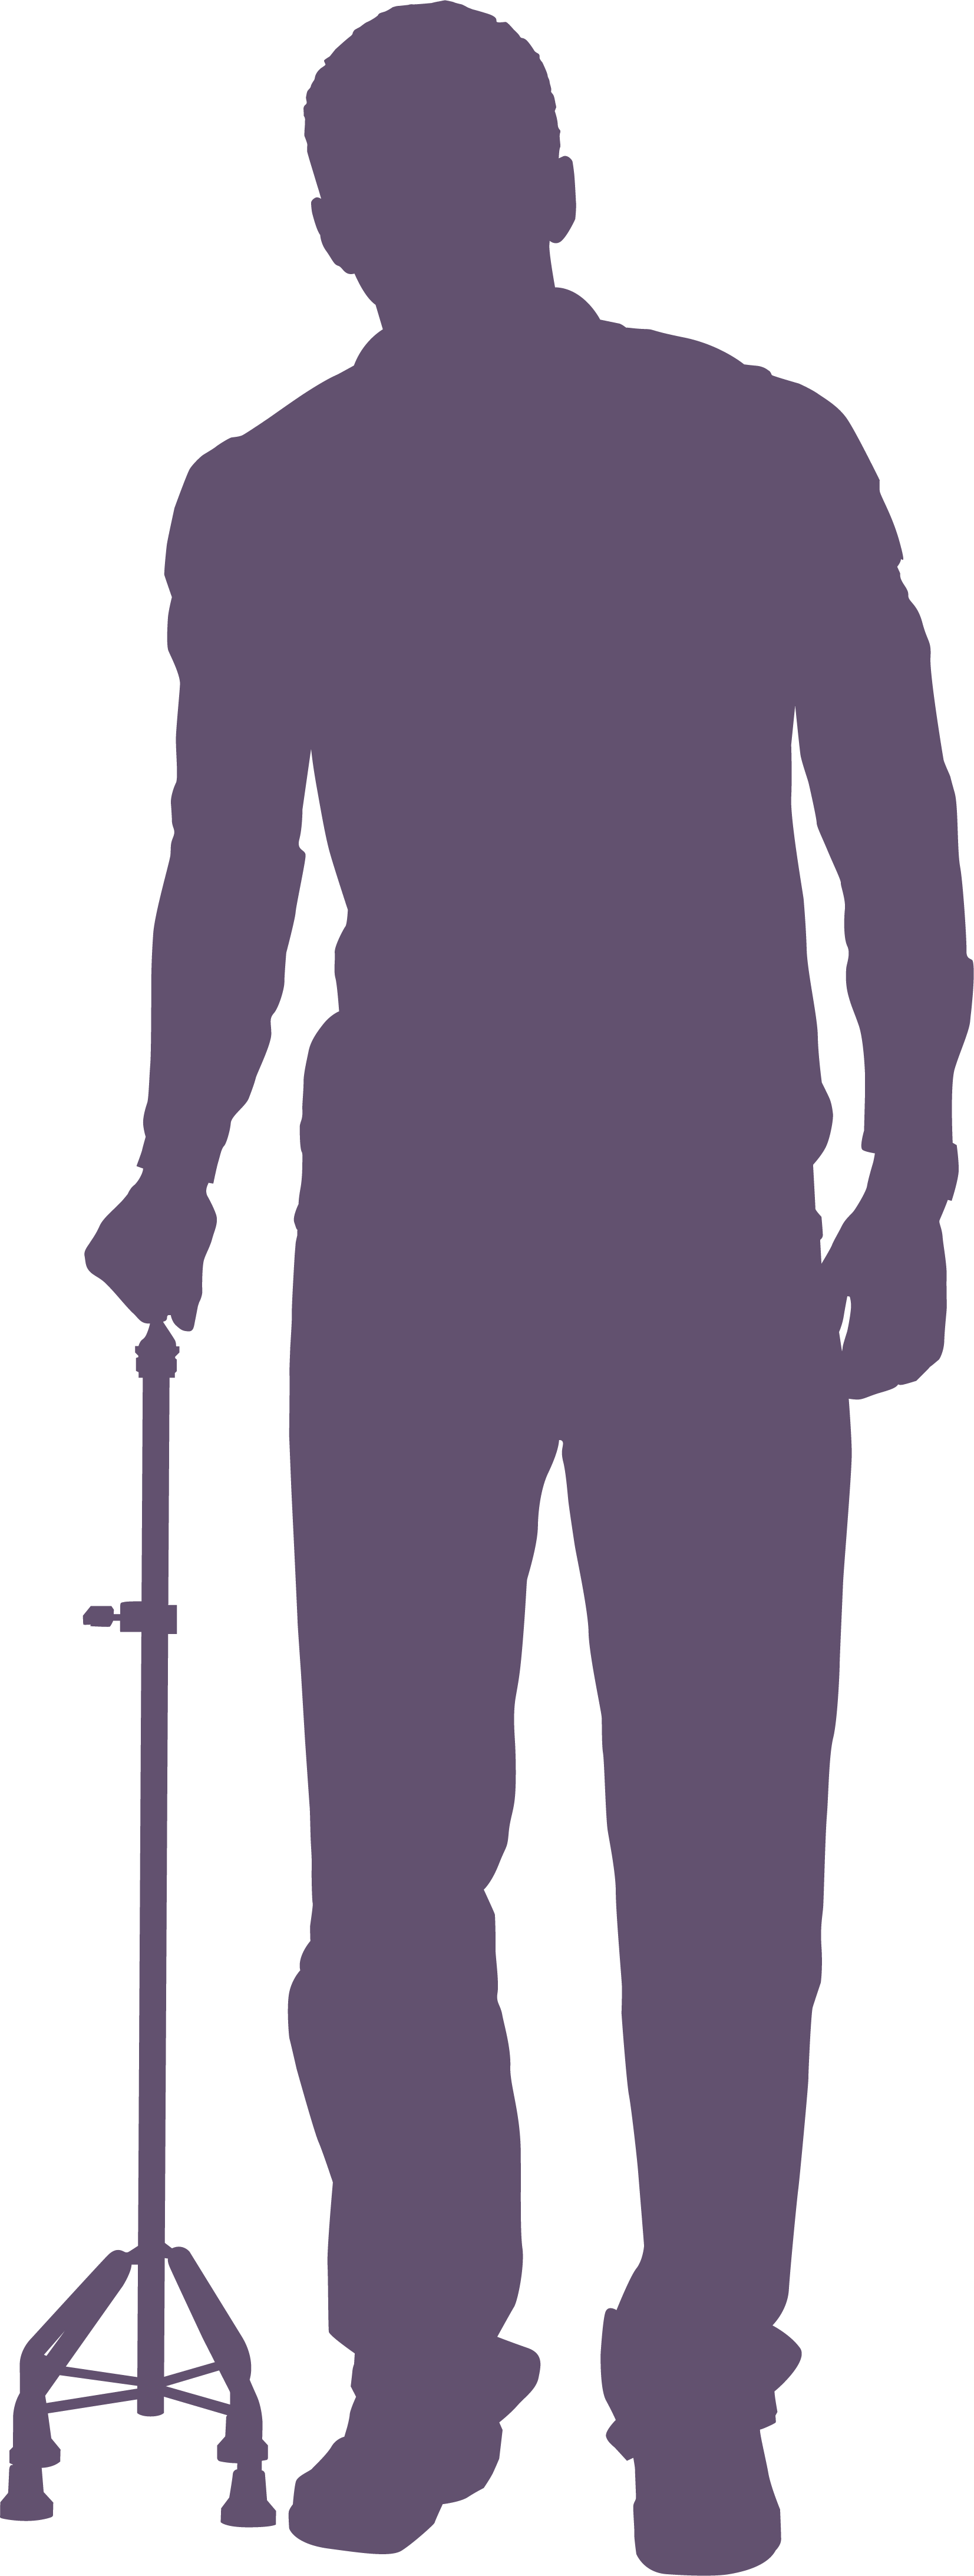 Person_with_walking_stick_responsiblepurple.png